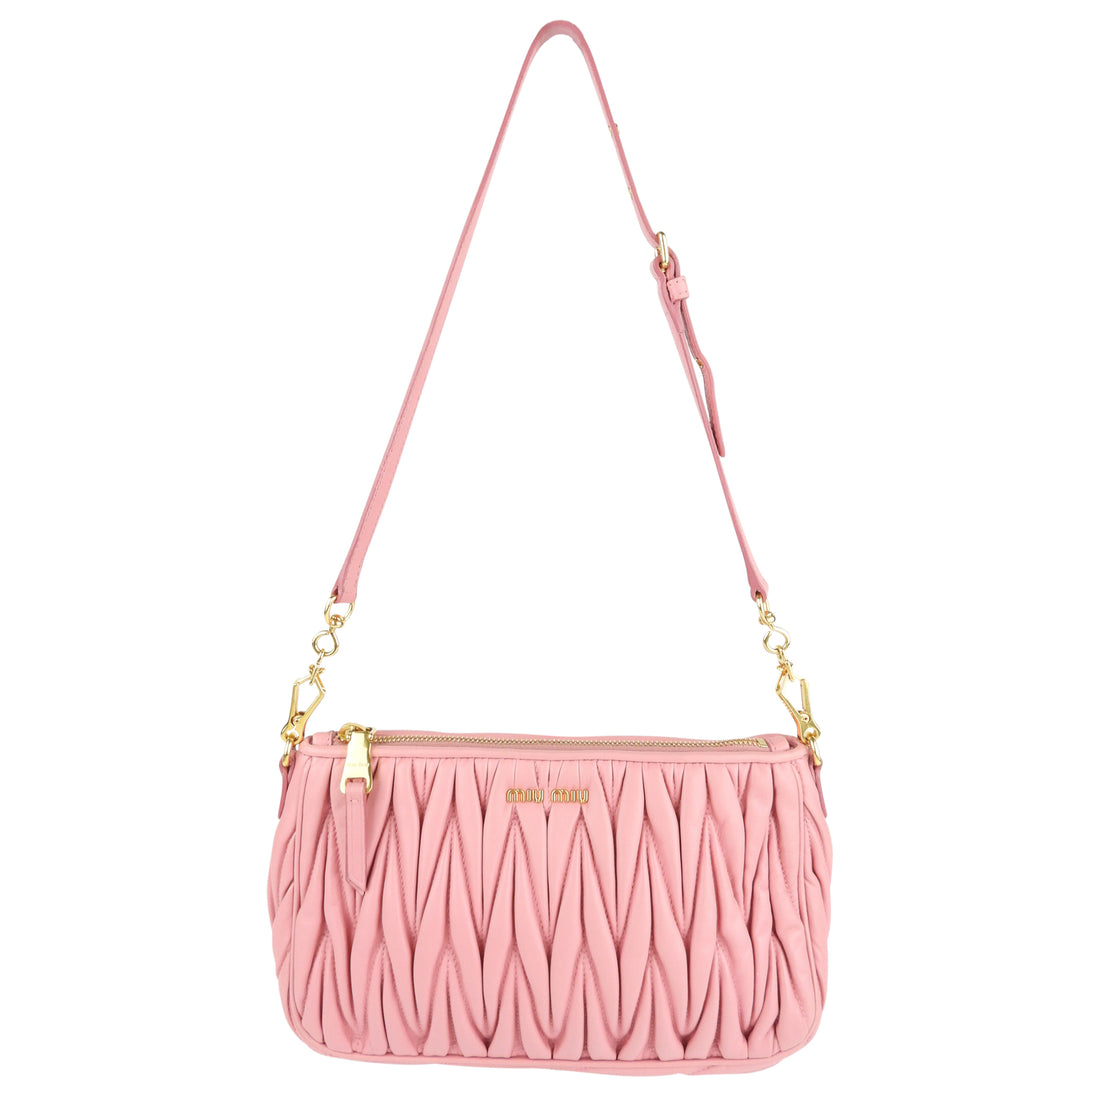 Miu Miu Pink Matelasse Leather Zip Pouch with Strap